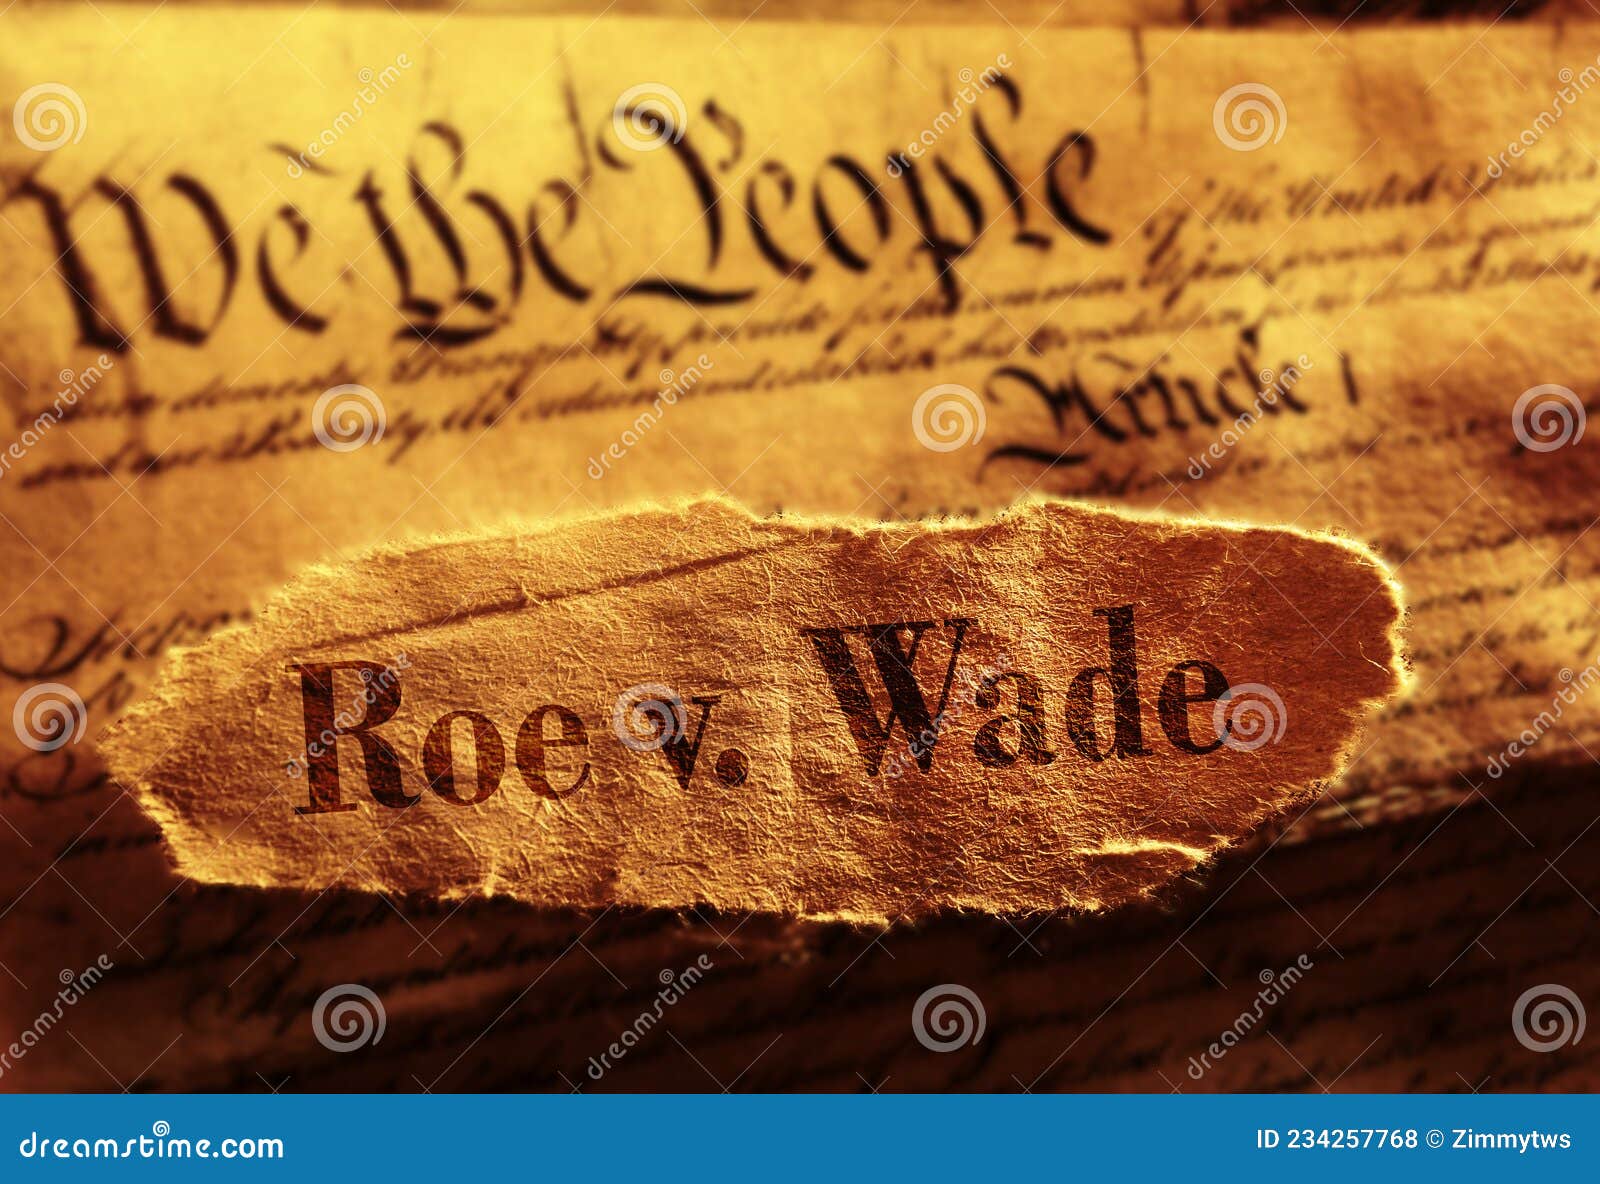 roe v wade newspaper headline on the united states constitution